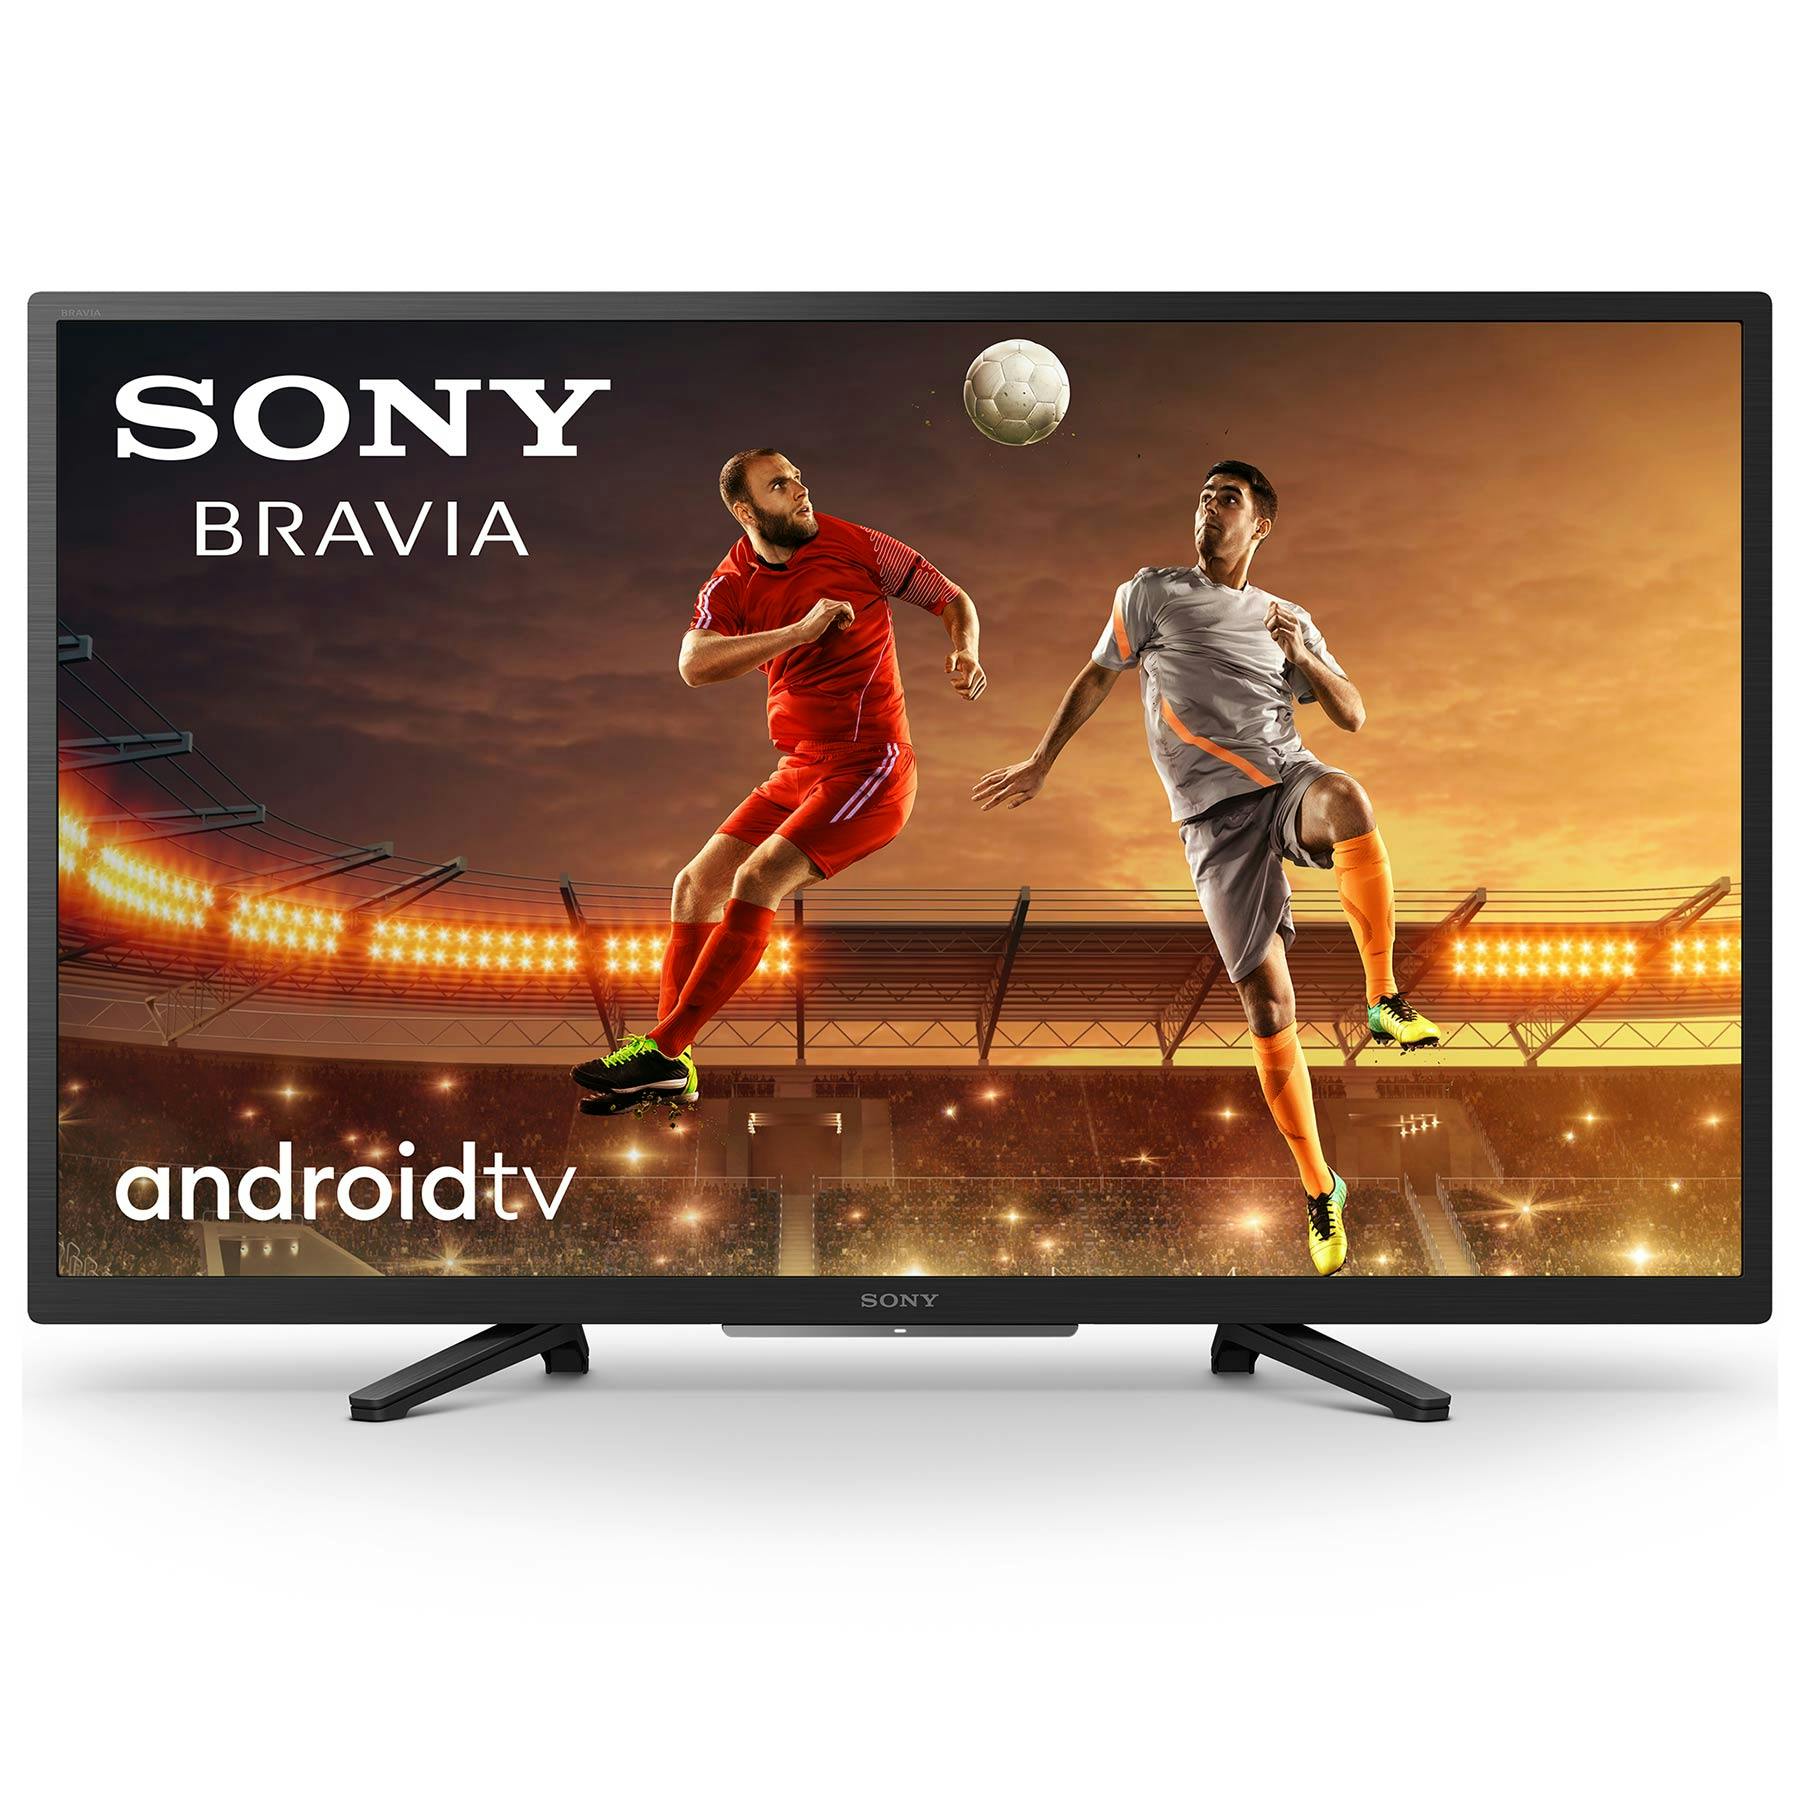 TCL 32 HD Ready HDR Android TV, 32S5200K